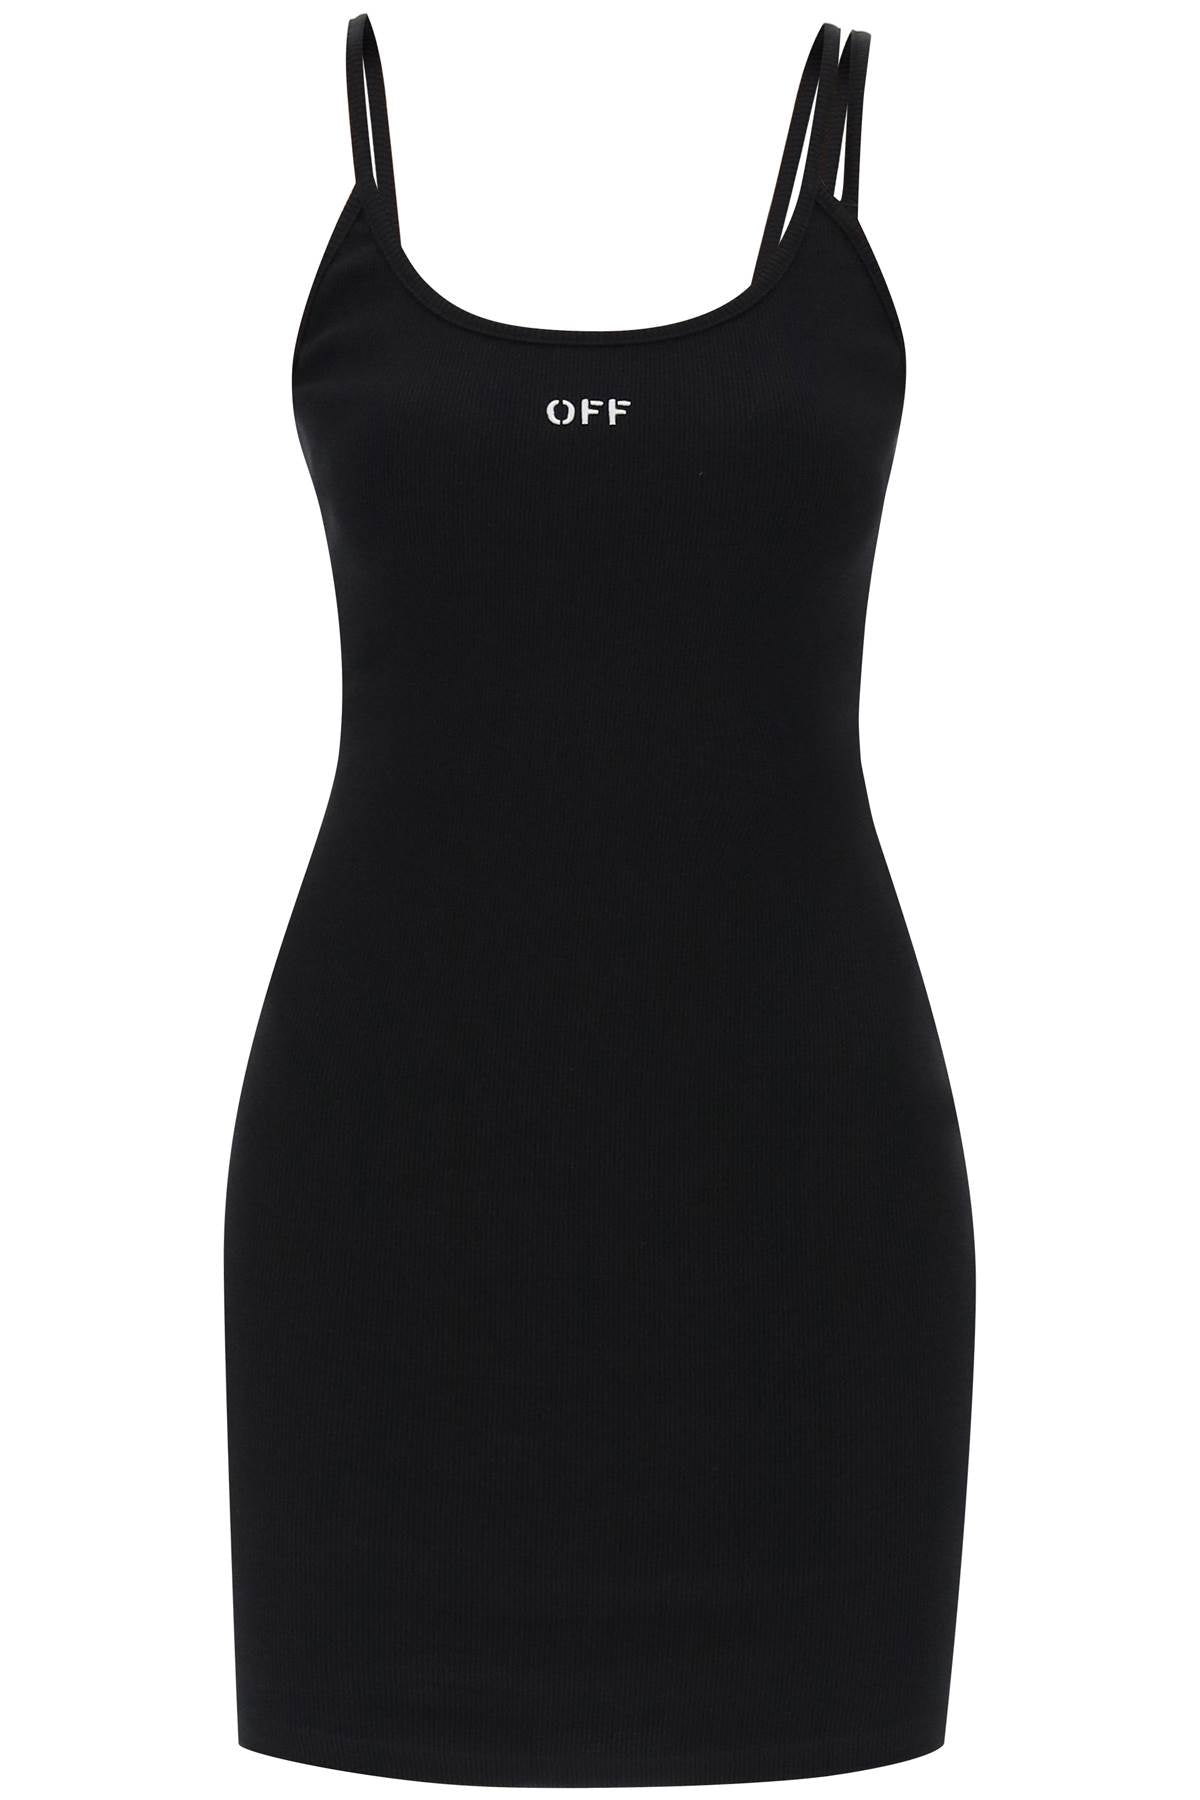 Off-white tank dress with off embroidery-0